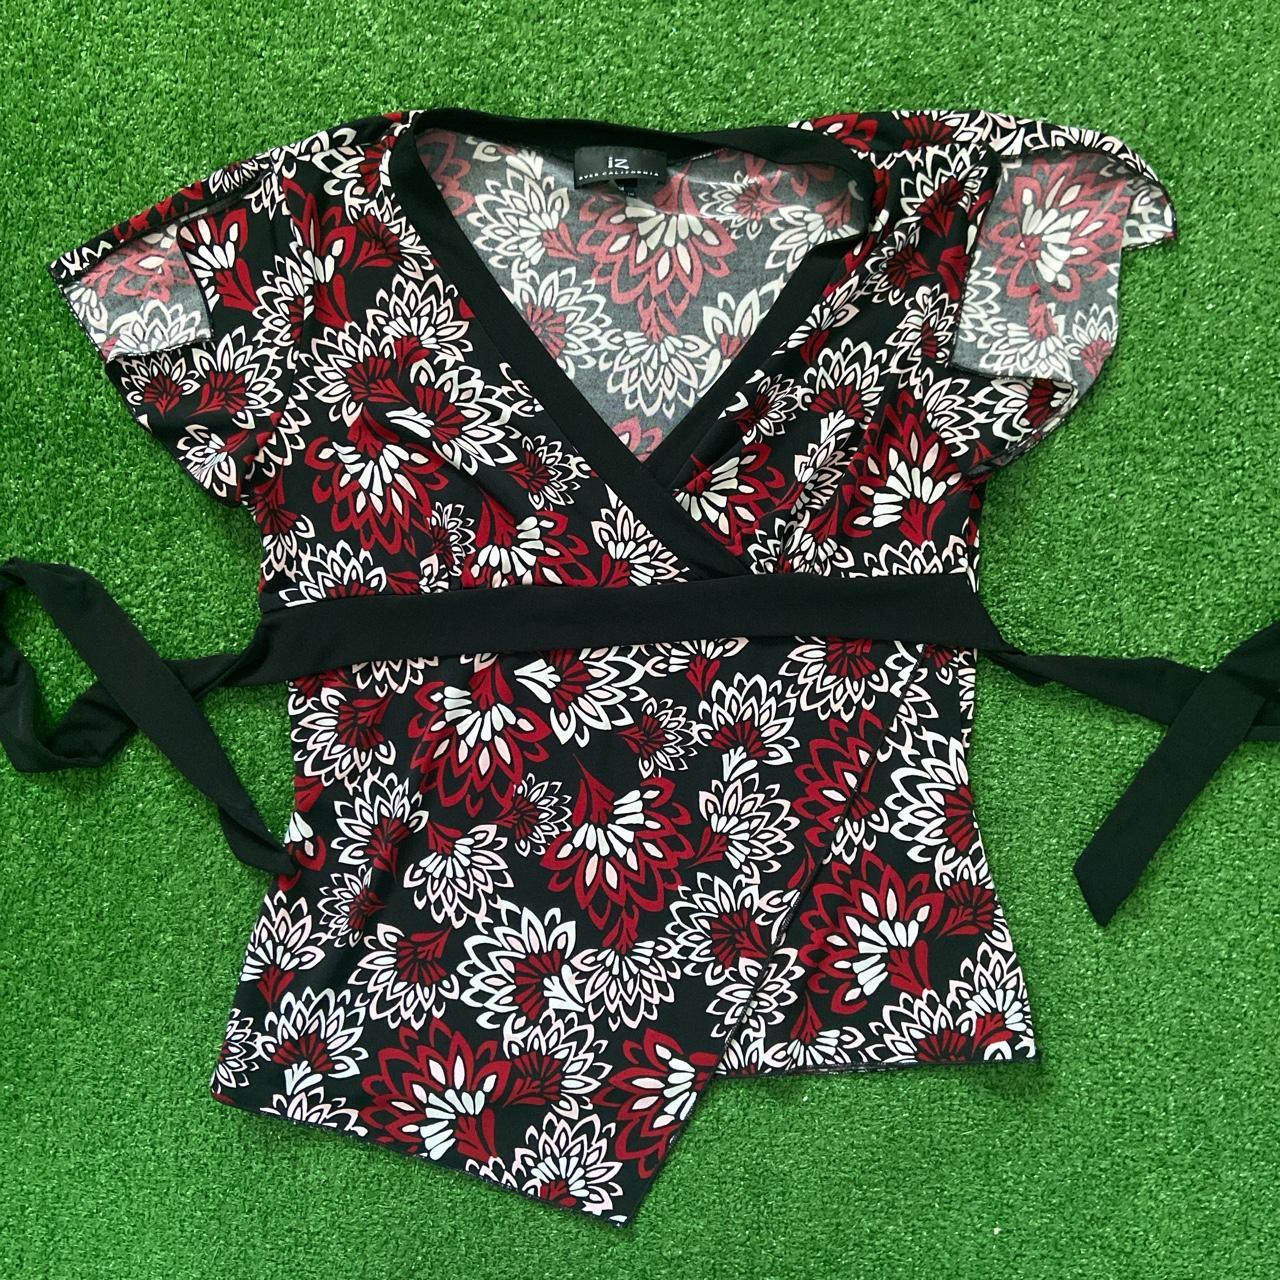 Product Image 1 - Cute flower print top. Has